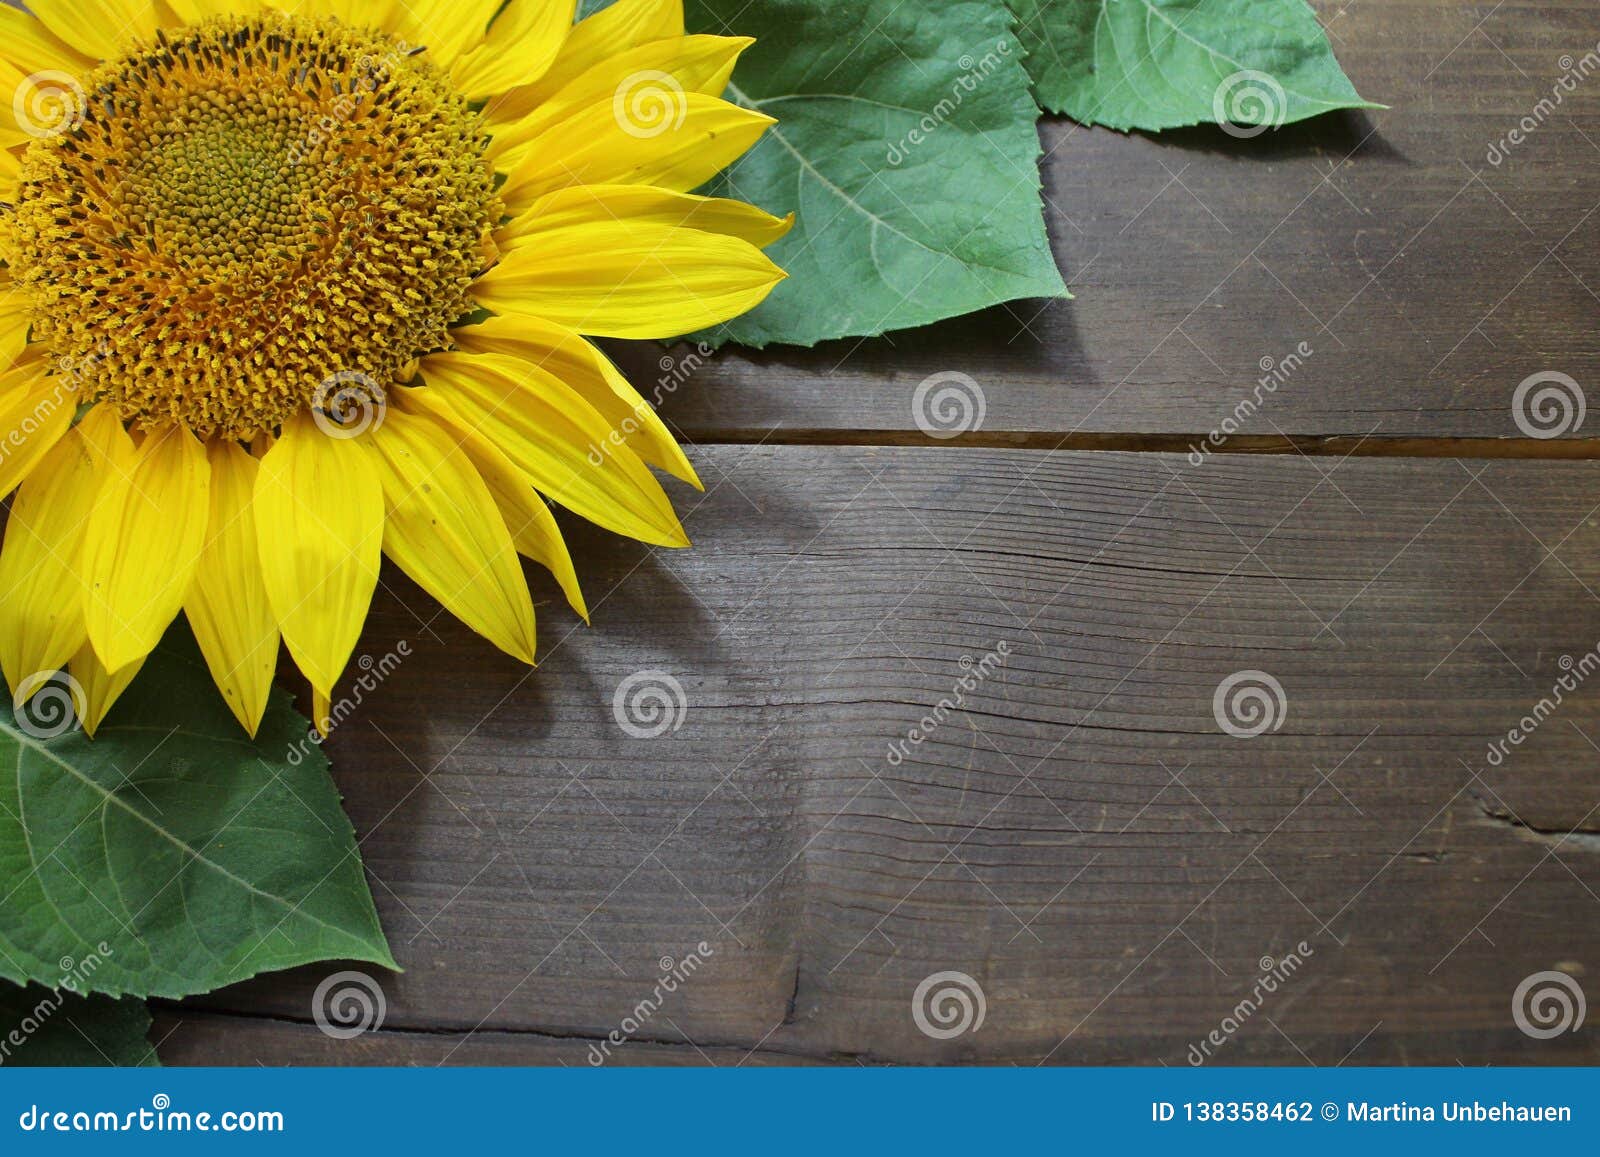 Border with a sunflower stock photo. Image of board - 138358462